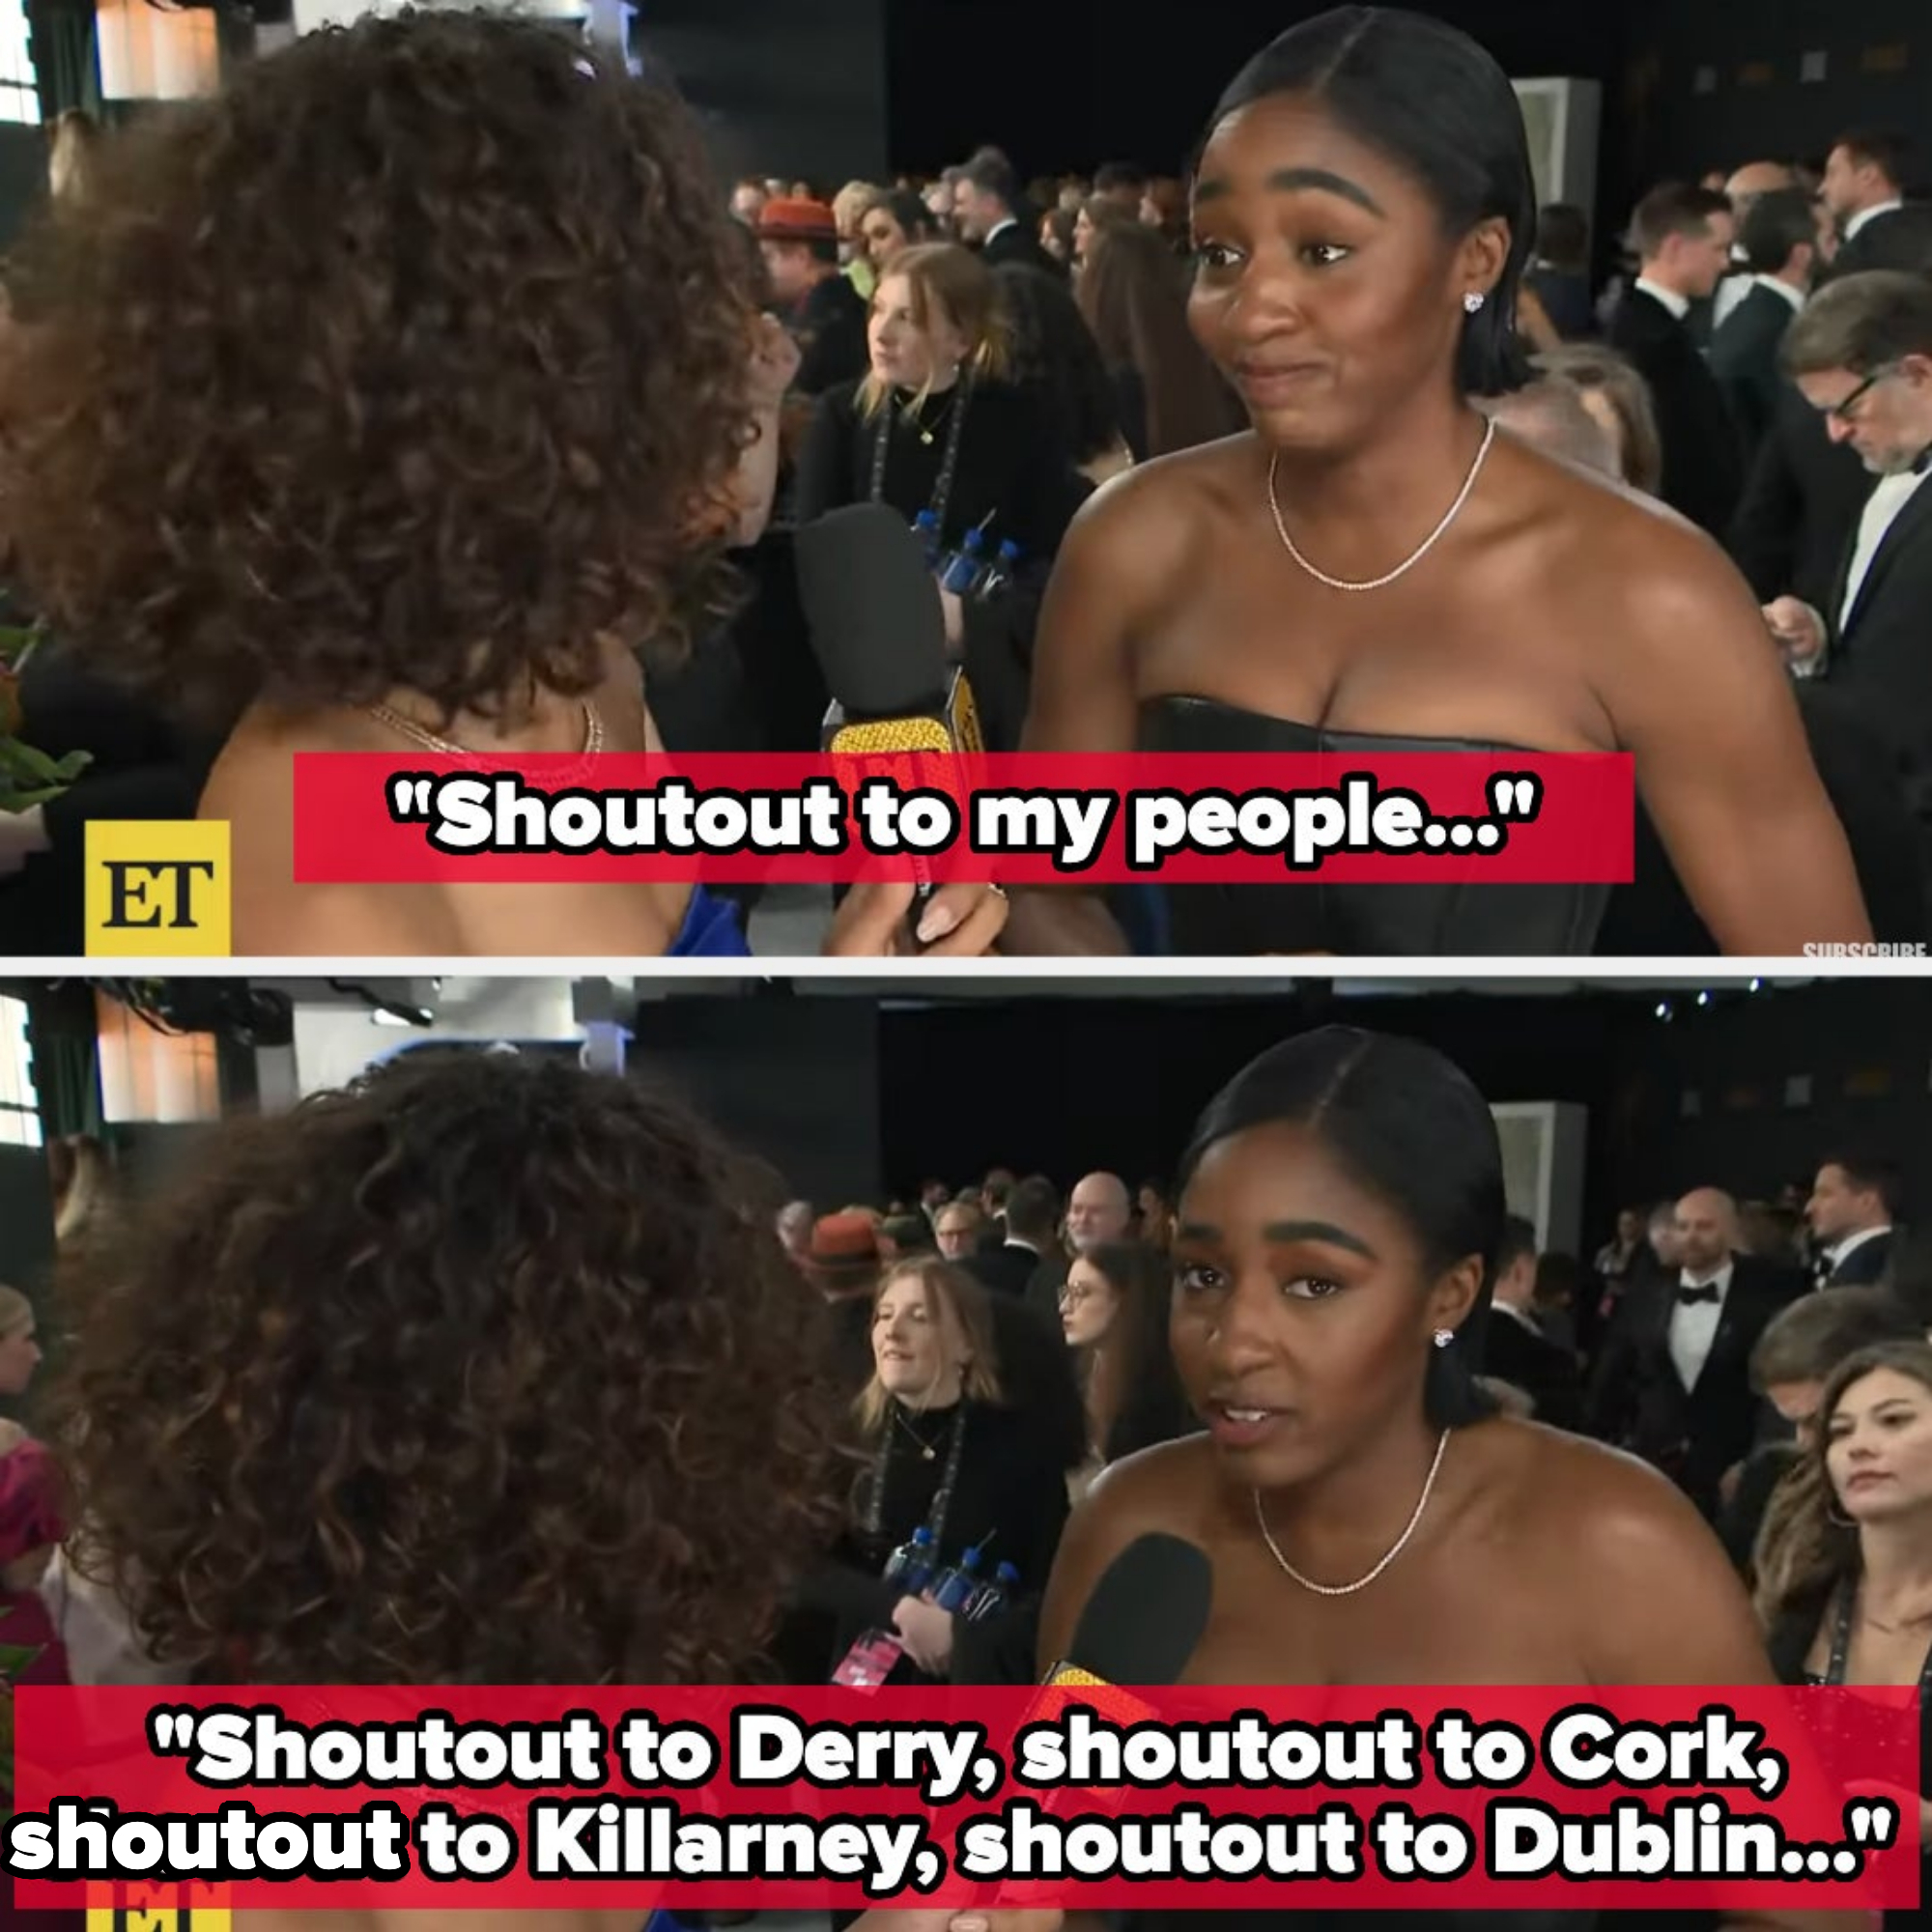 Ayo getting interviewed with captions of her giving shoutouts to Irish locations